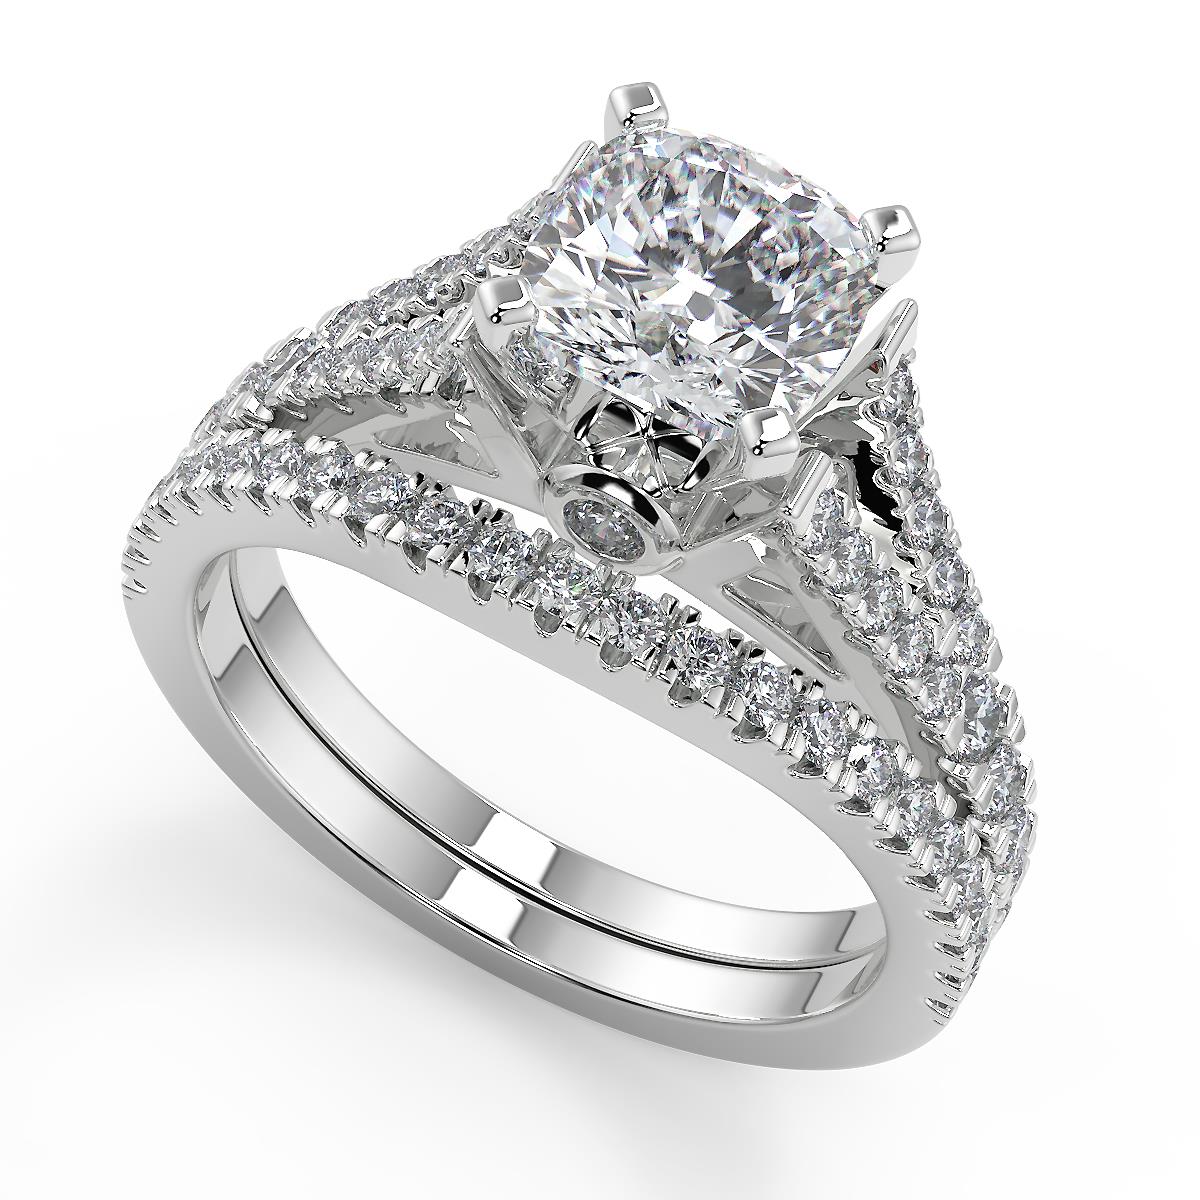 295 Ct Cushion Cut Pave Cathedral 4 Prong Diamond Engagement Ring Set